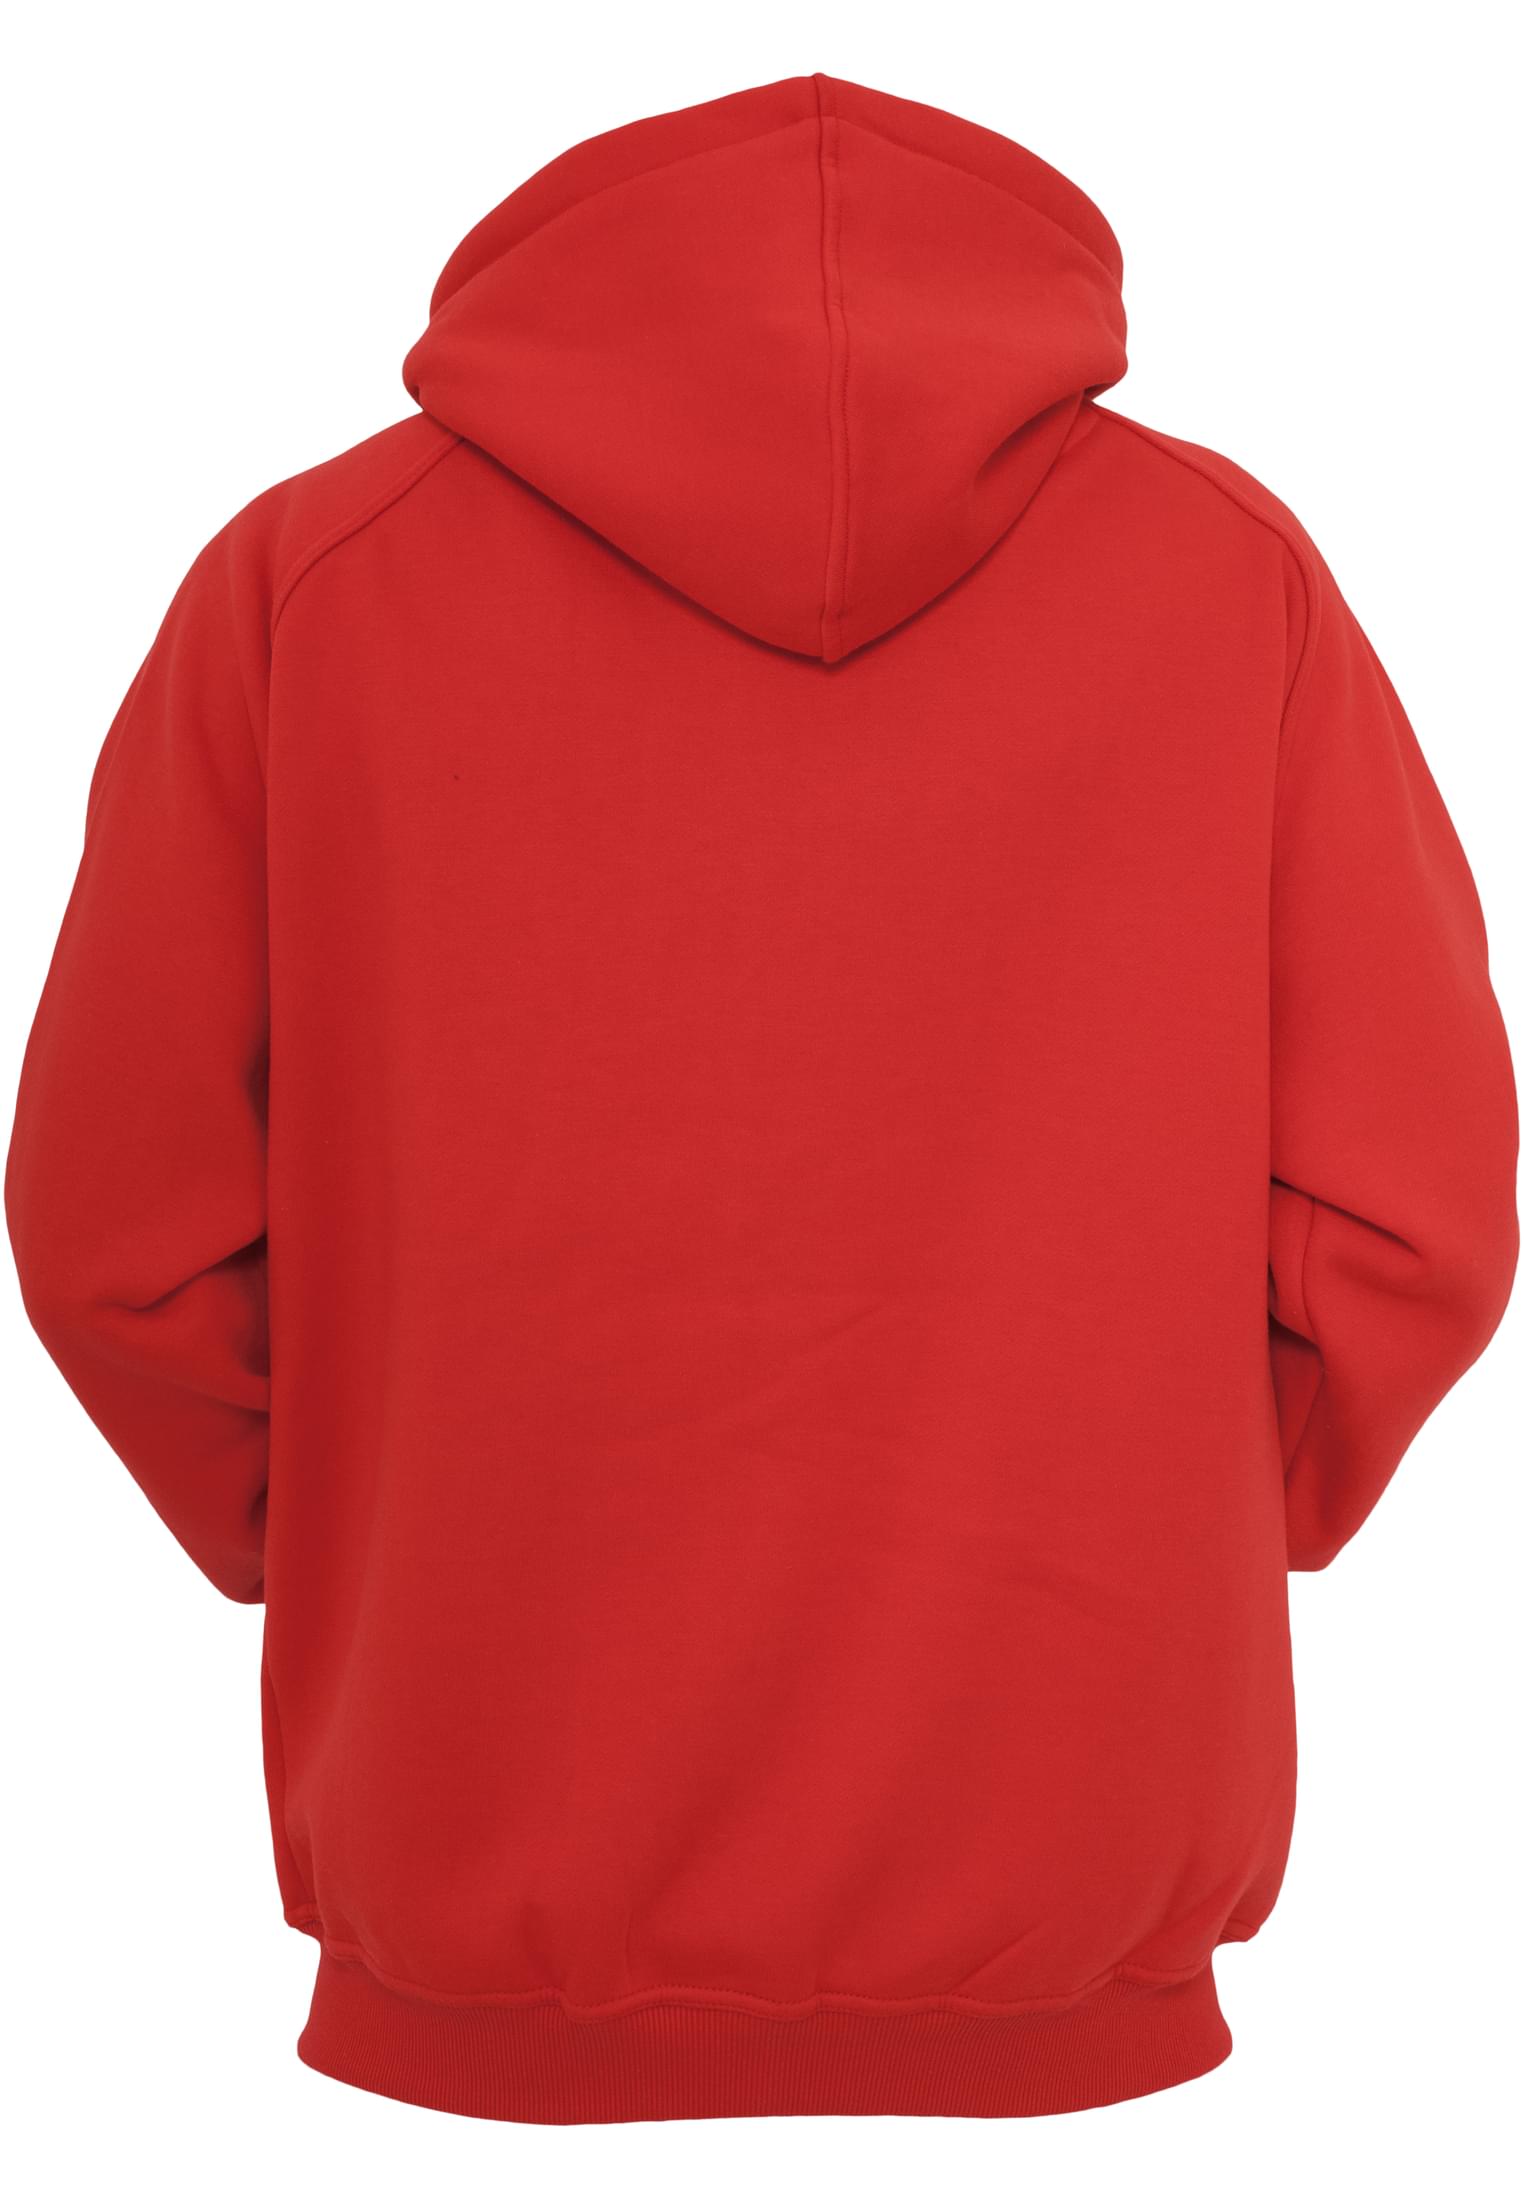 Plus Size Blank Hoody in Farbe red